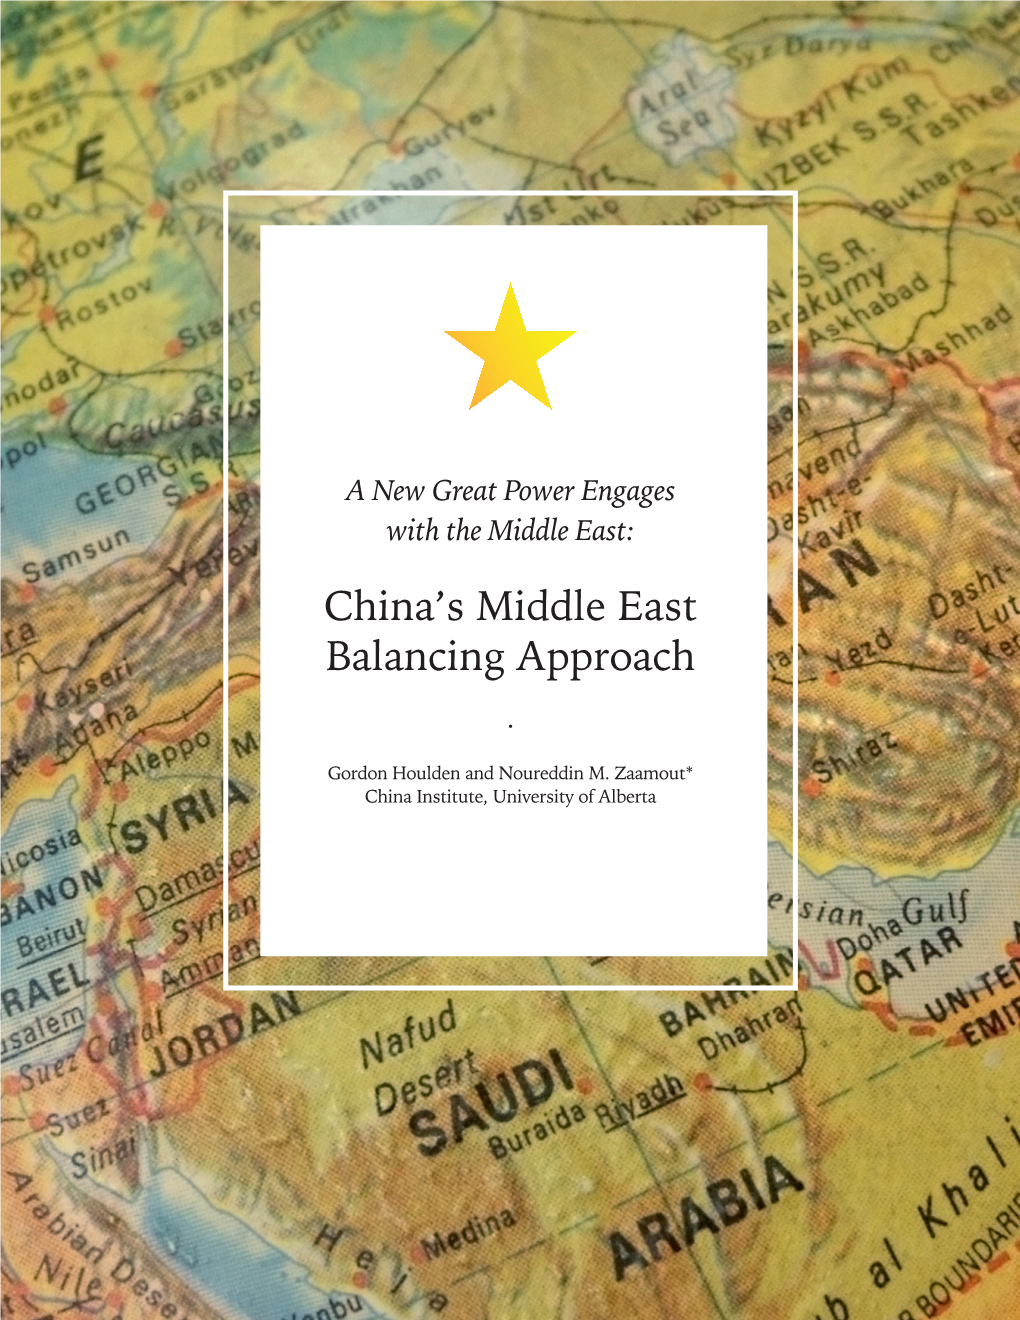 China's Middle East Balancing Approach